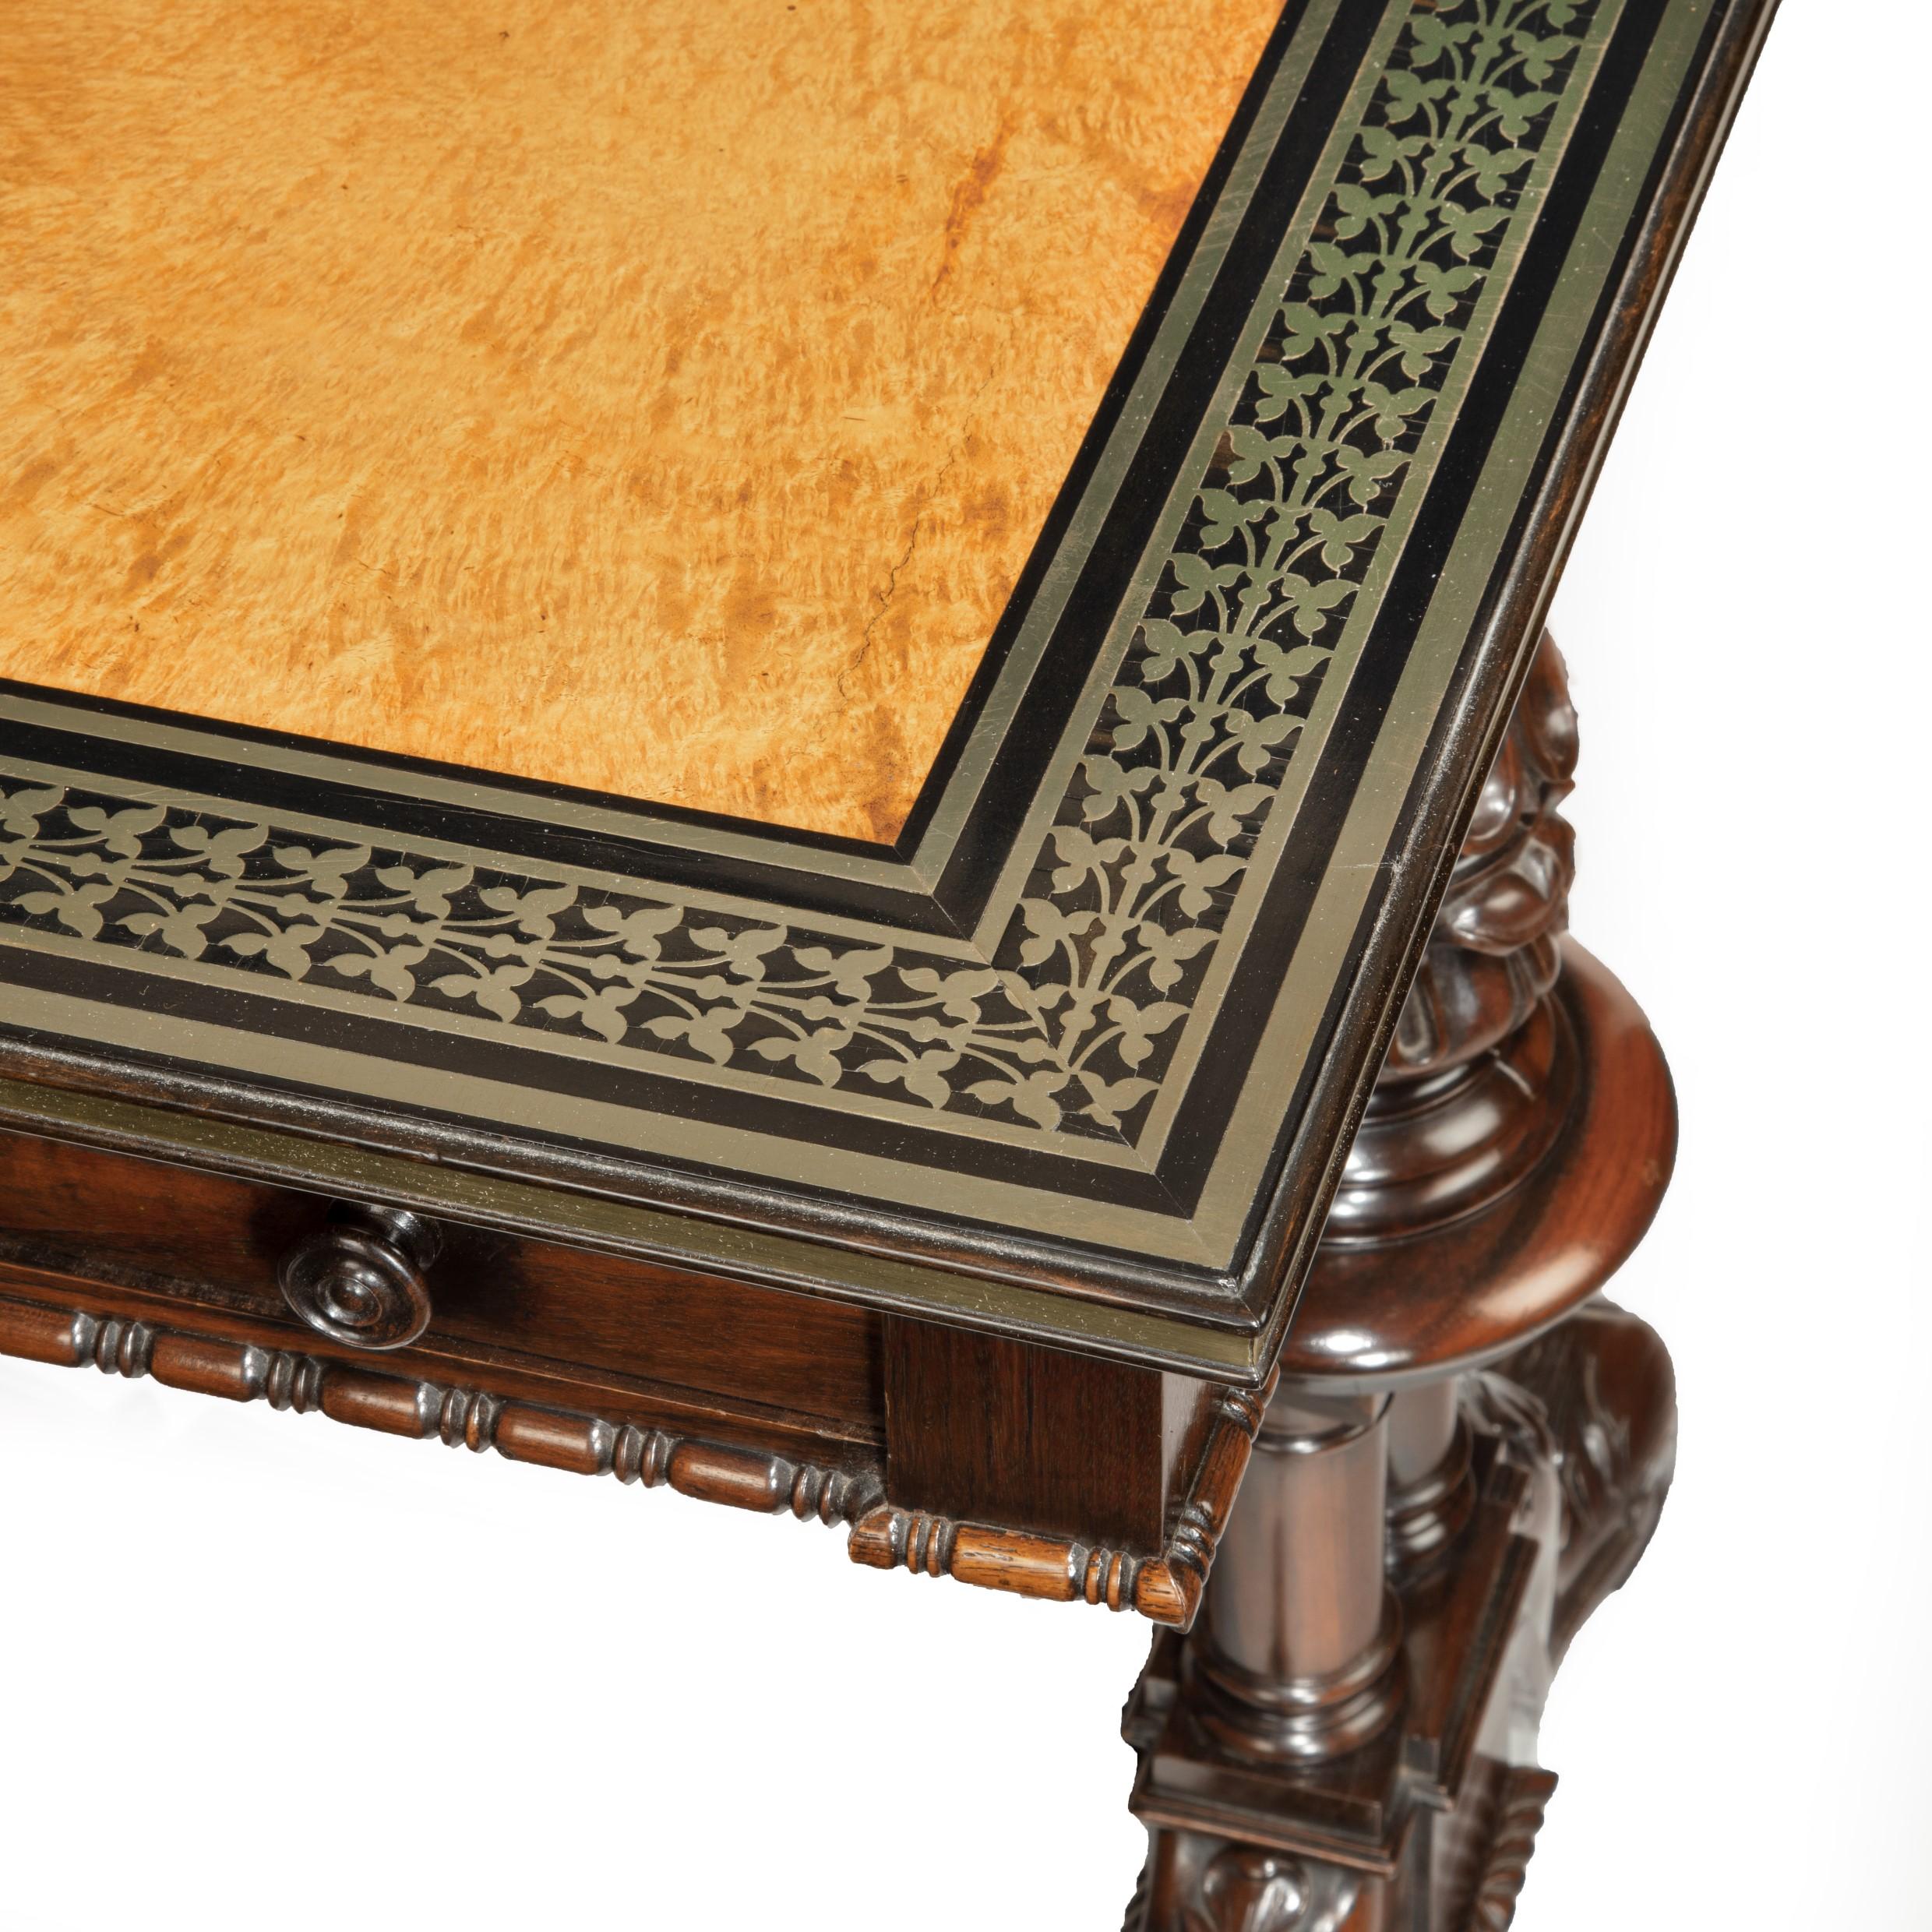 A striking Goncalo Alves (Albuera wood) writing table attributed to Gillows and Bullock, the rectangular leather-inset top with a wide band of paired ivy leaves and double borders in brass boulle-work inlaid into ebony probably by George Bullock,